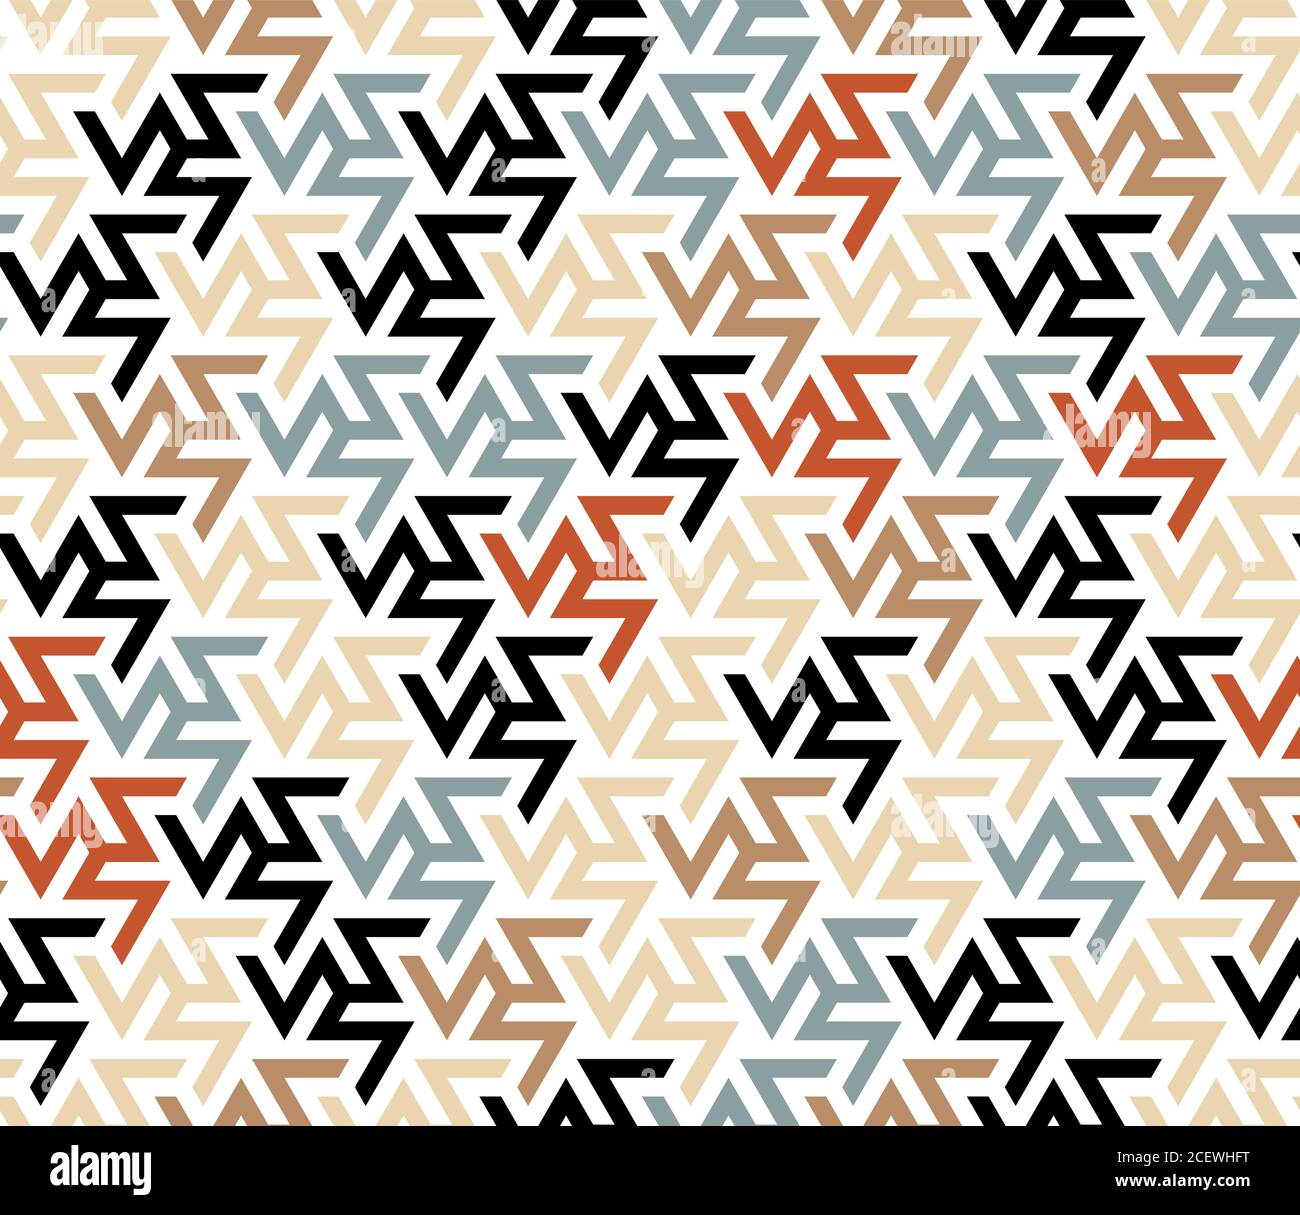 Zigzag color mix vector pattern. Seamless geometric repeating texture for fabric design, cloth, textile Stock Vector